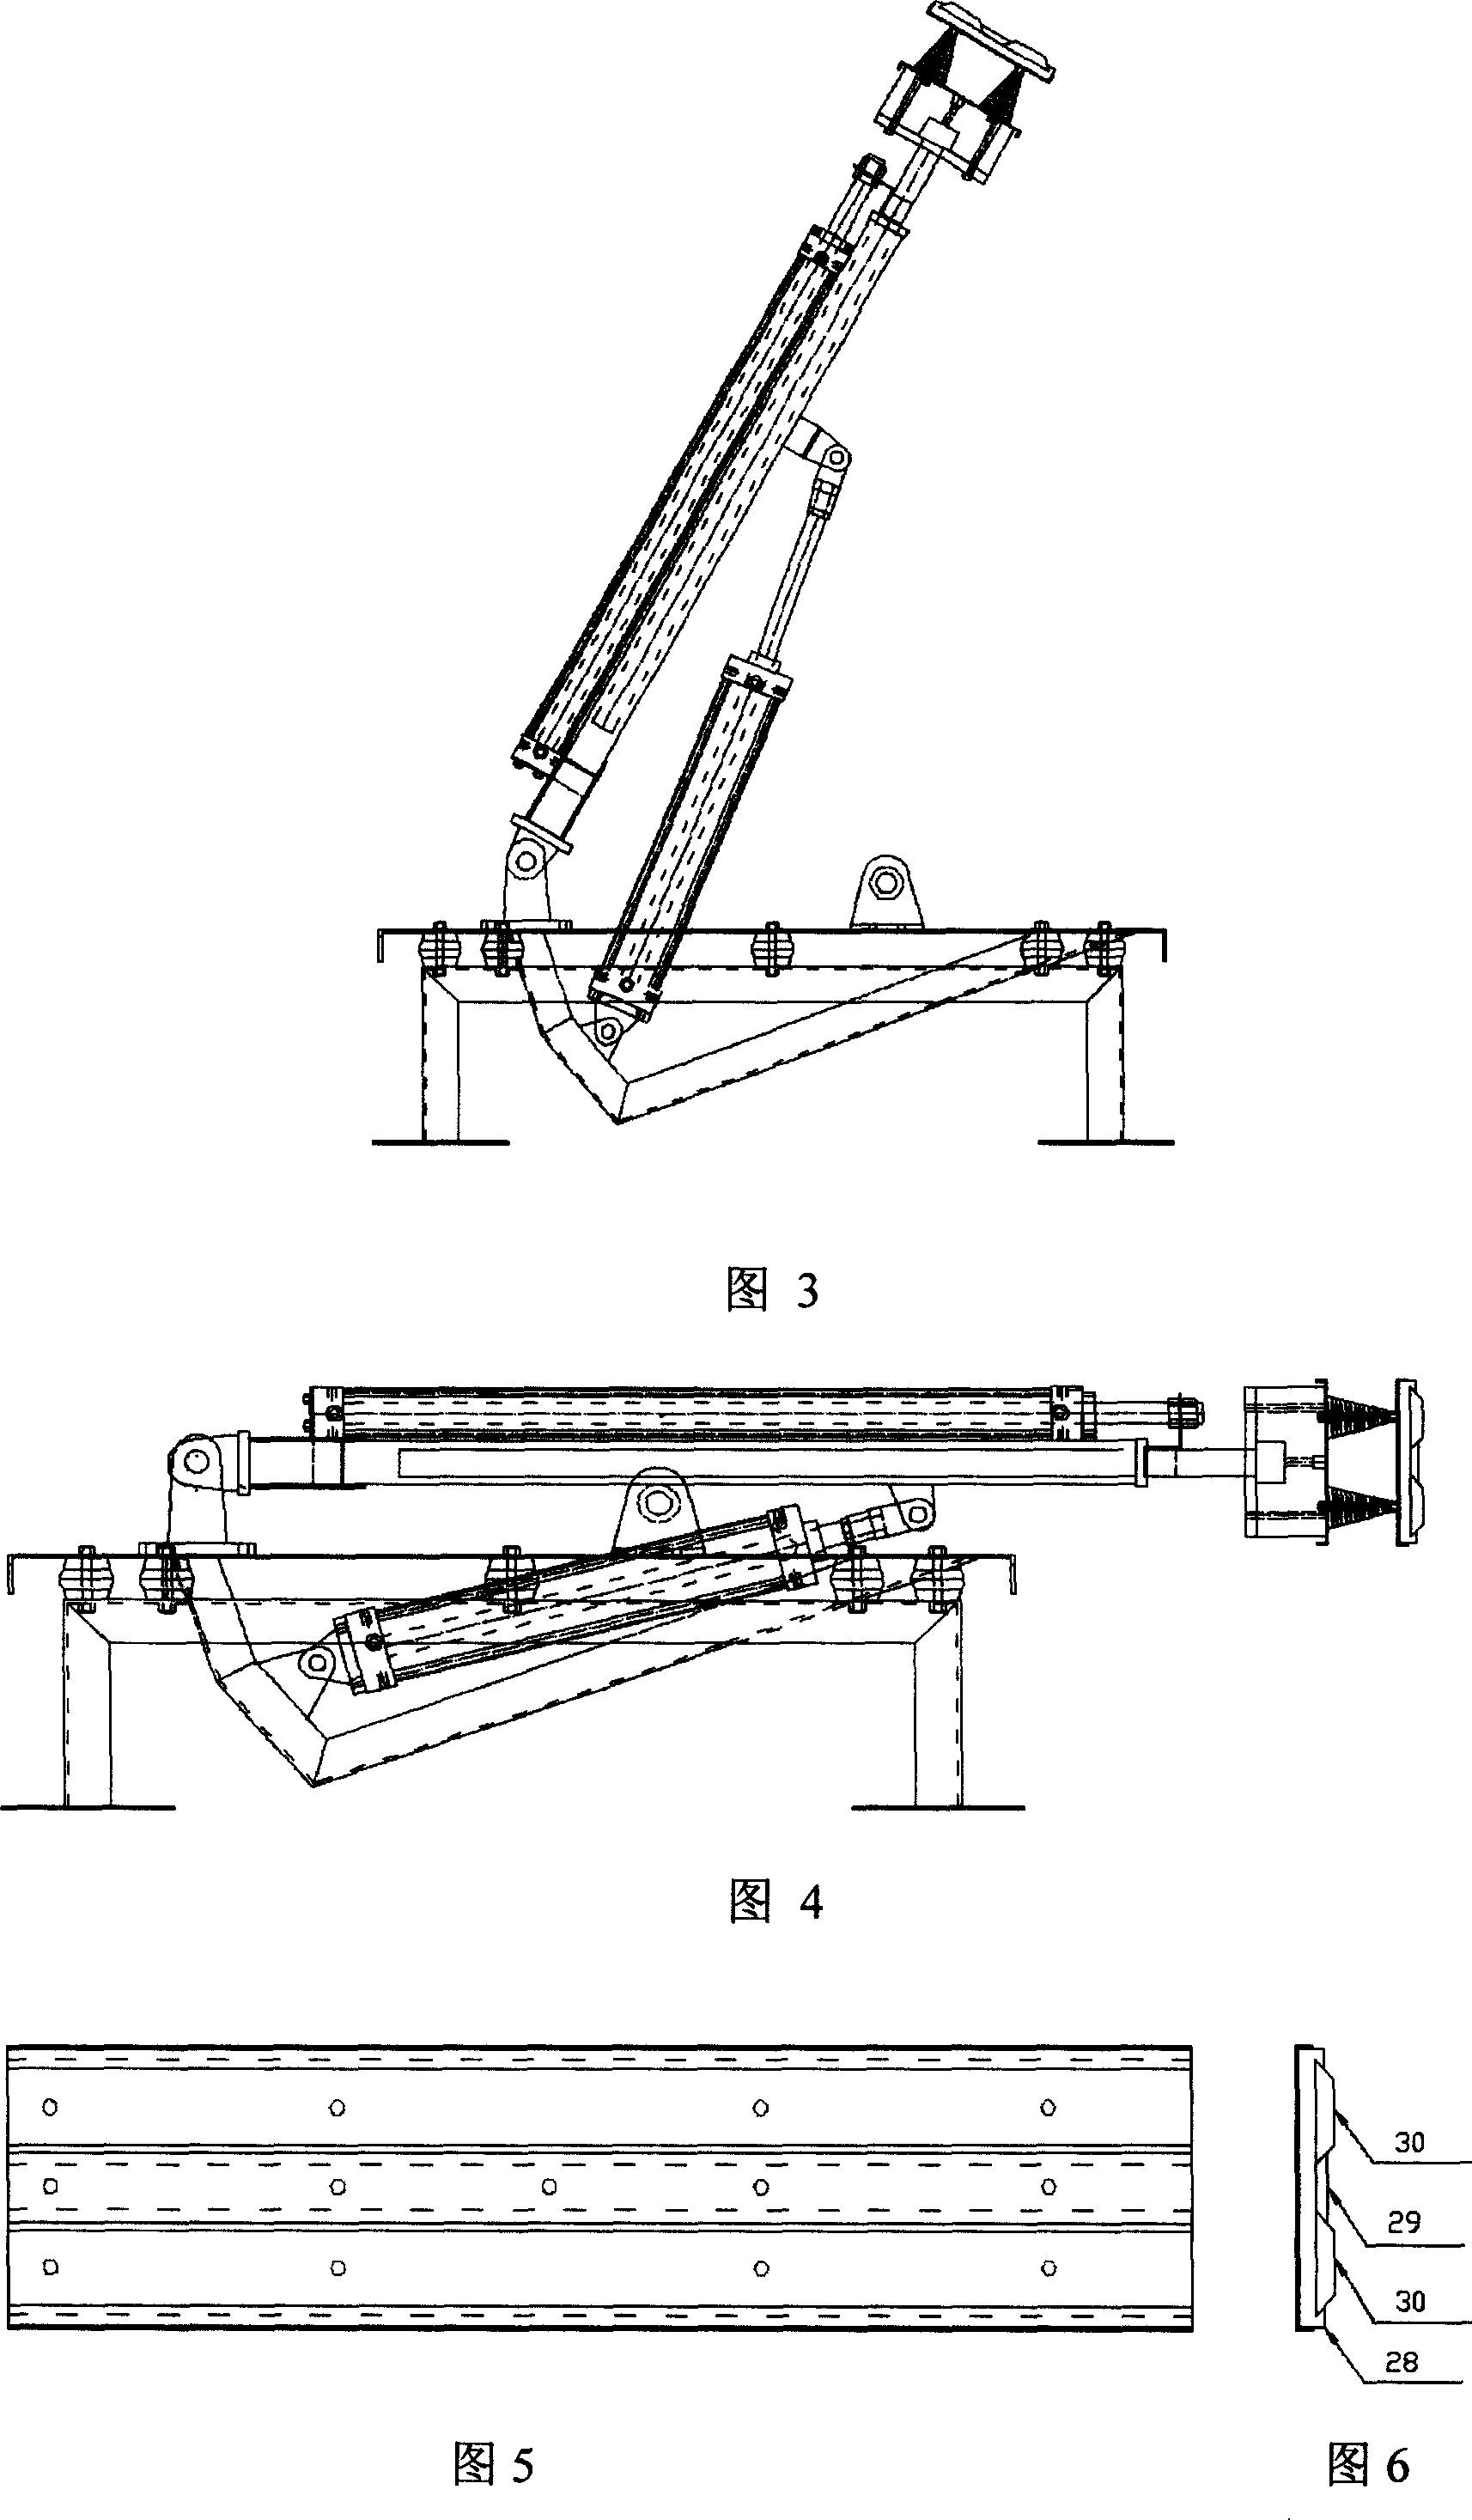 Bi slide cylinder horizontal bipolar current collector of electrially-propelled vehicle